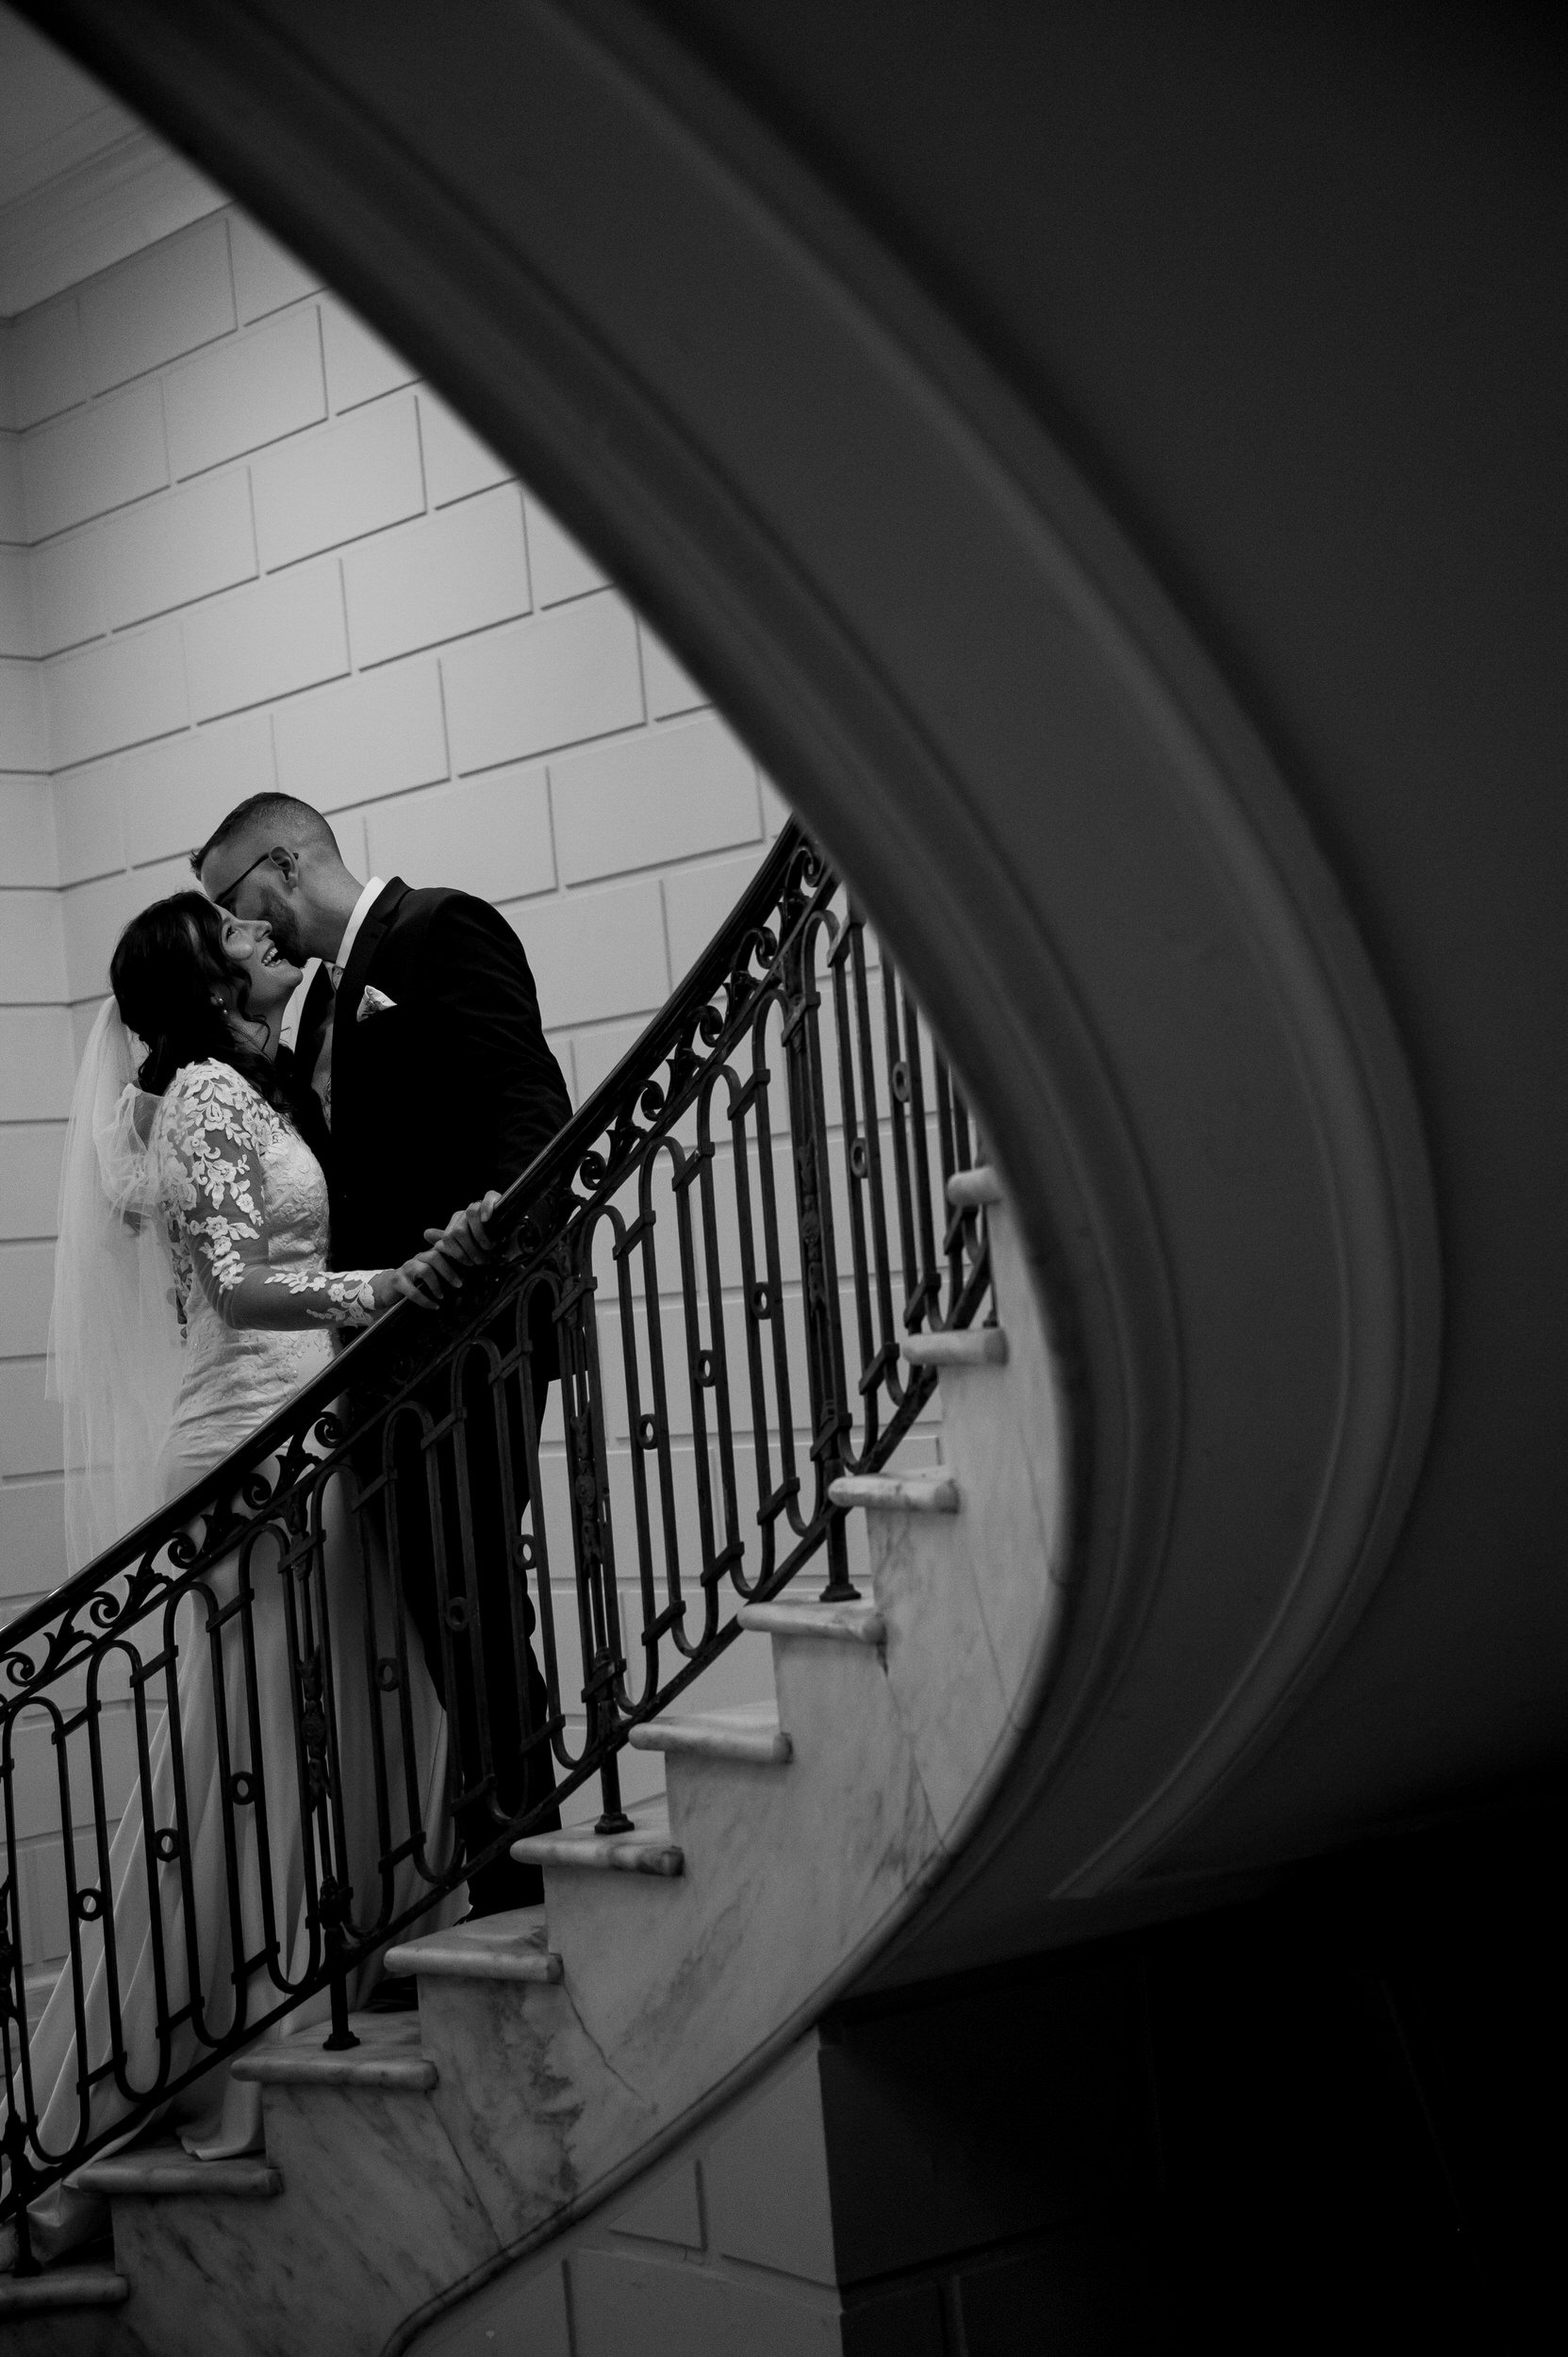 The couple kisses on the stairs